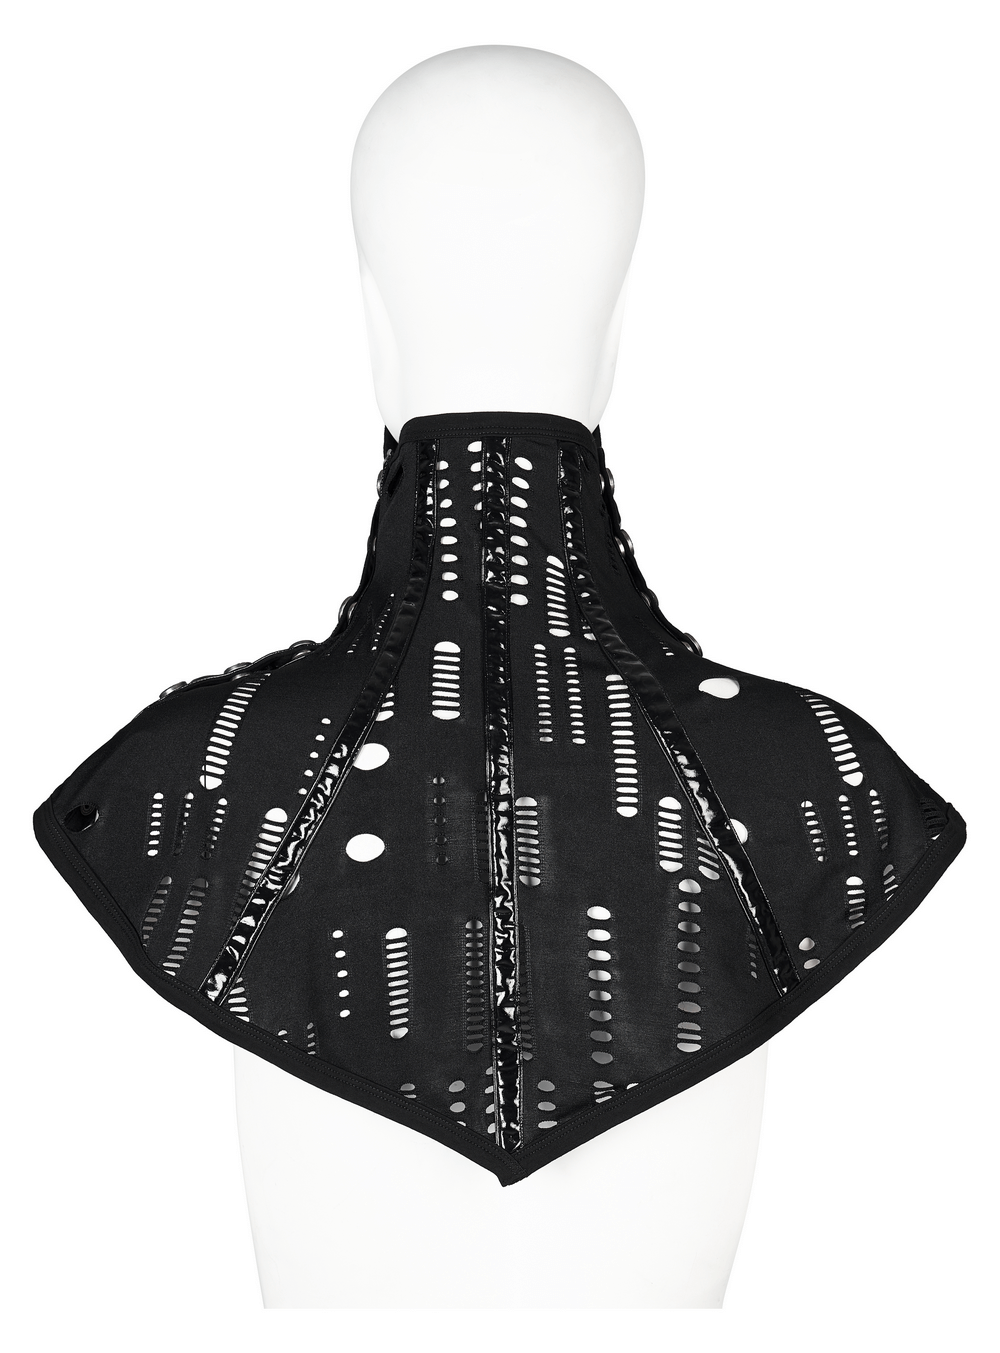 Goth Stylish Face Mask Collar with Buttons and Holes